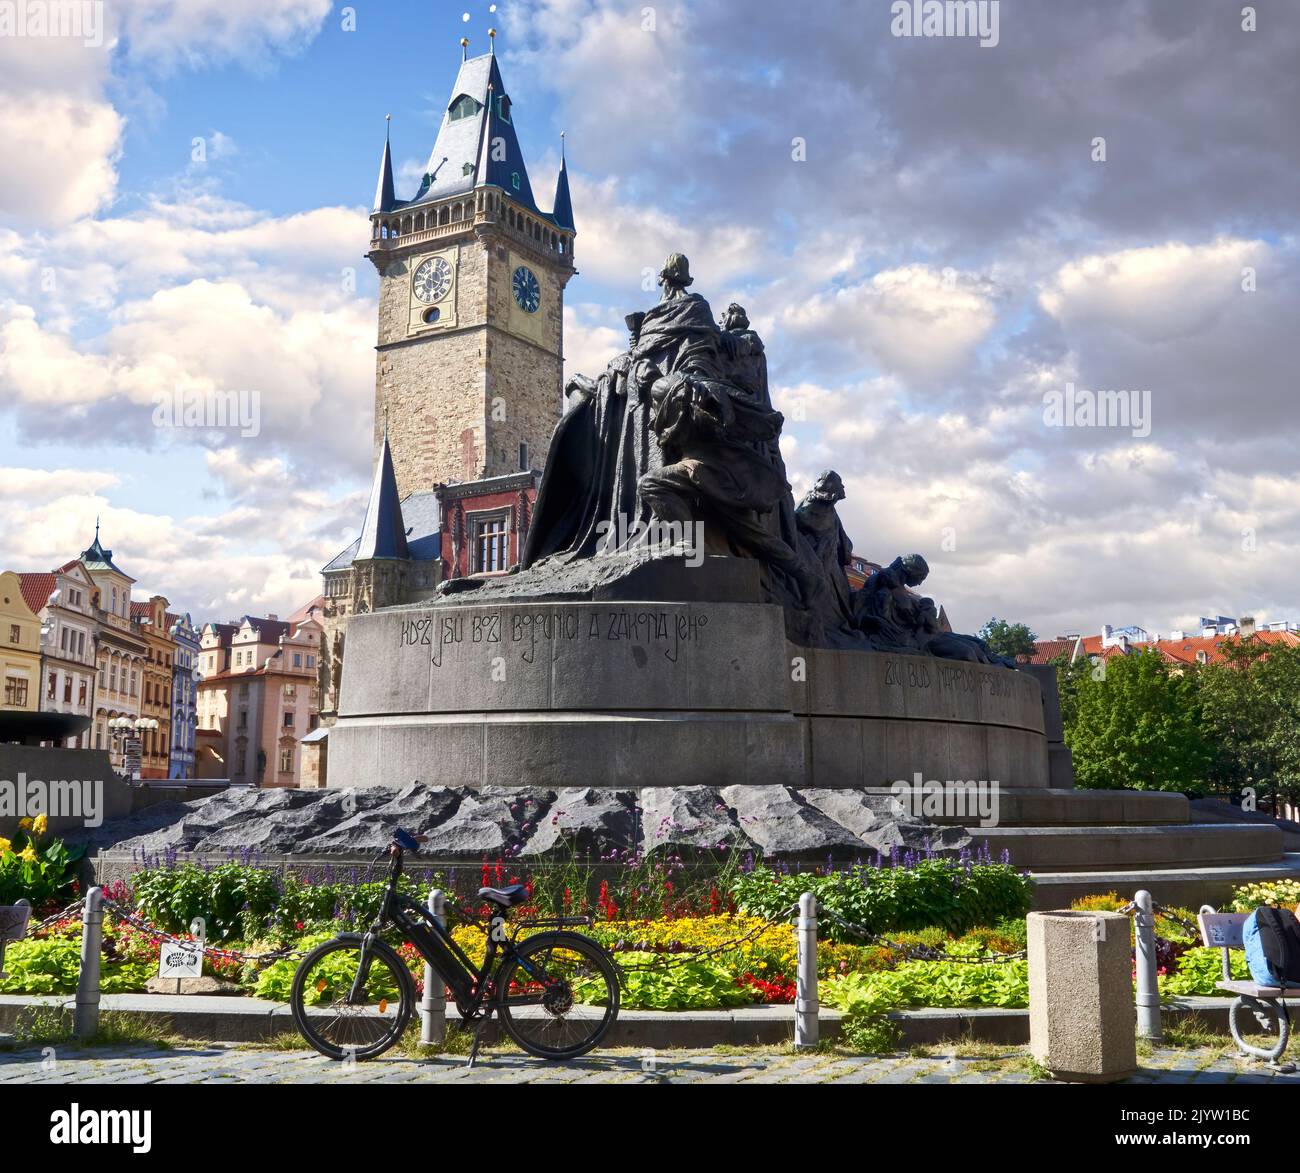 Prague, Czechia, August 29, 2022: Staromestske namesti, the oldest square in Prague with the sculpture of a martyr, with parked bicycle, bicycle tour Stock Photo